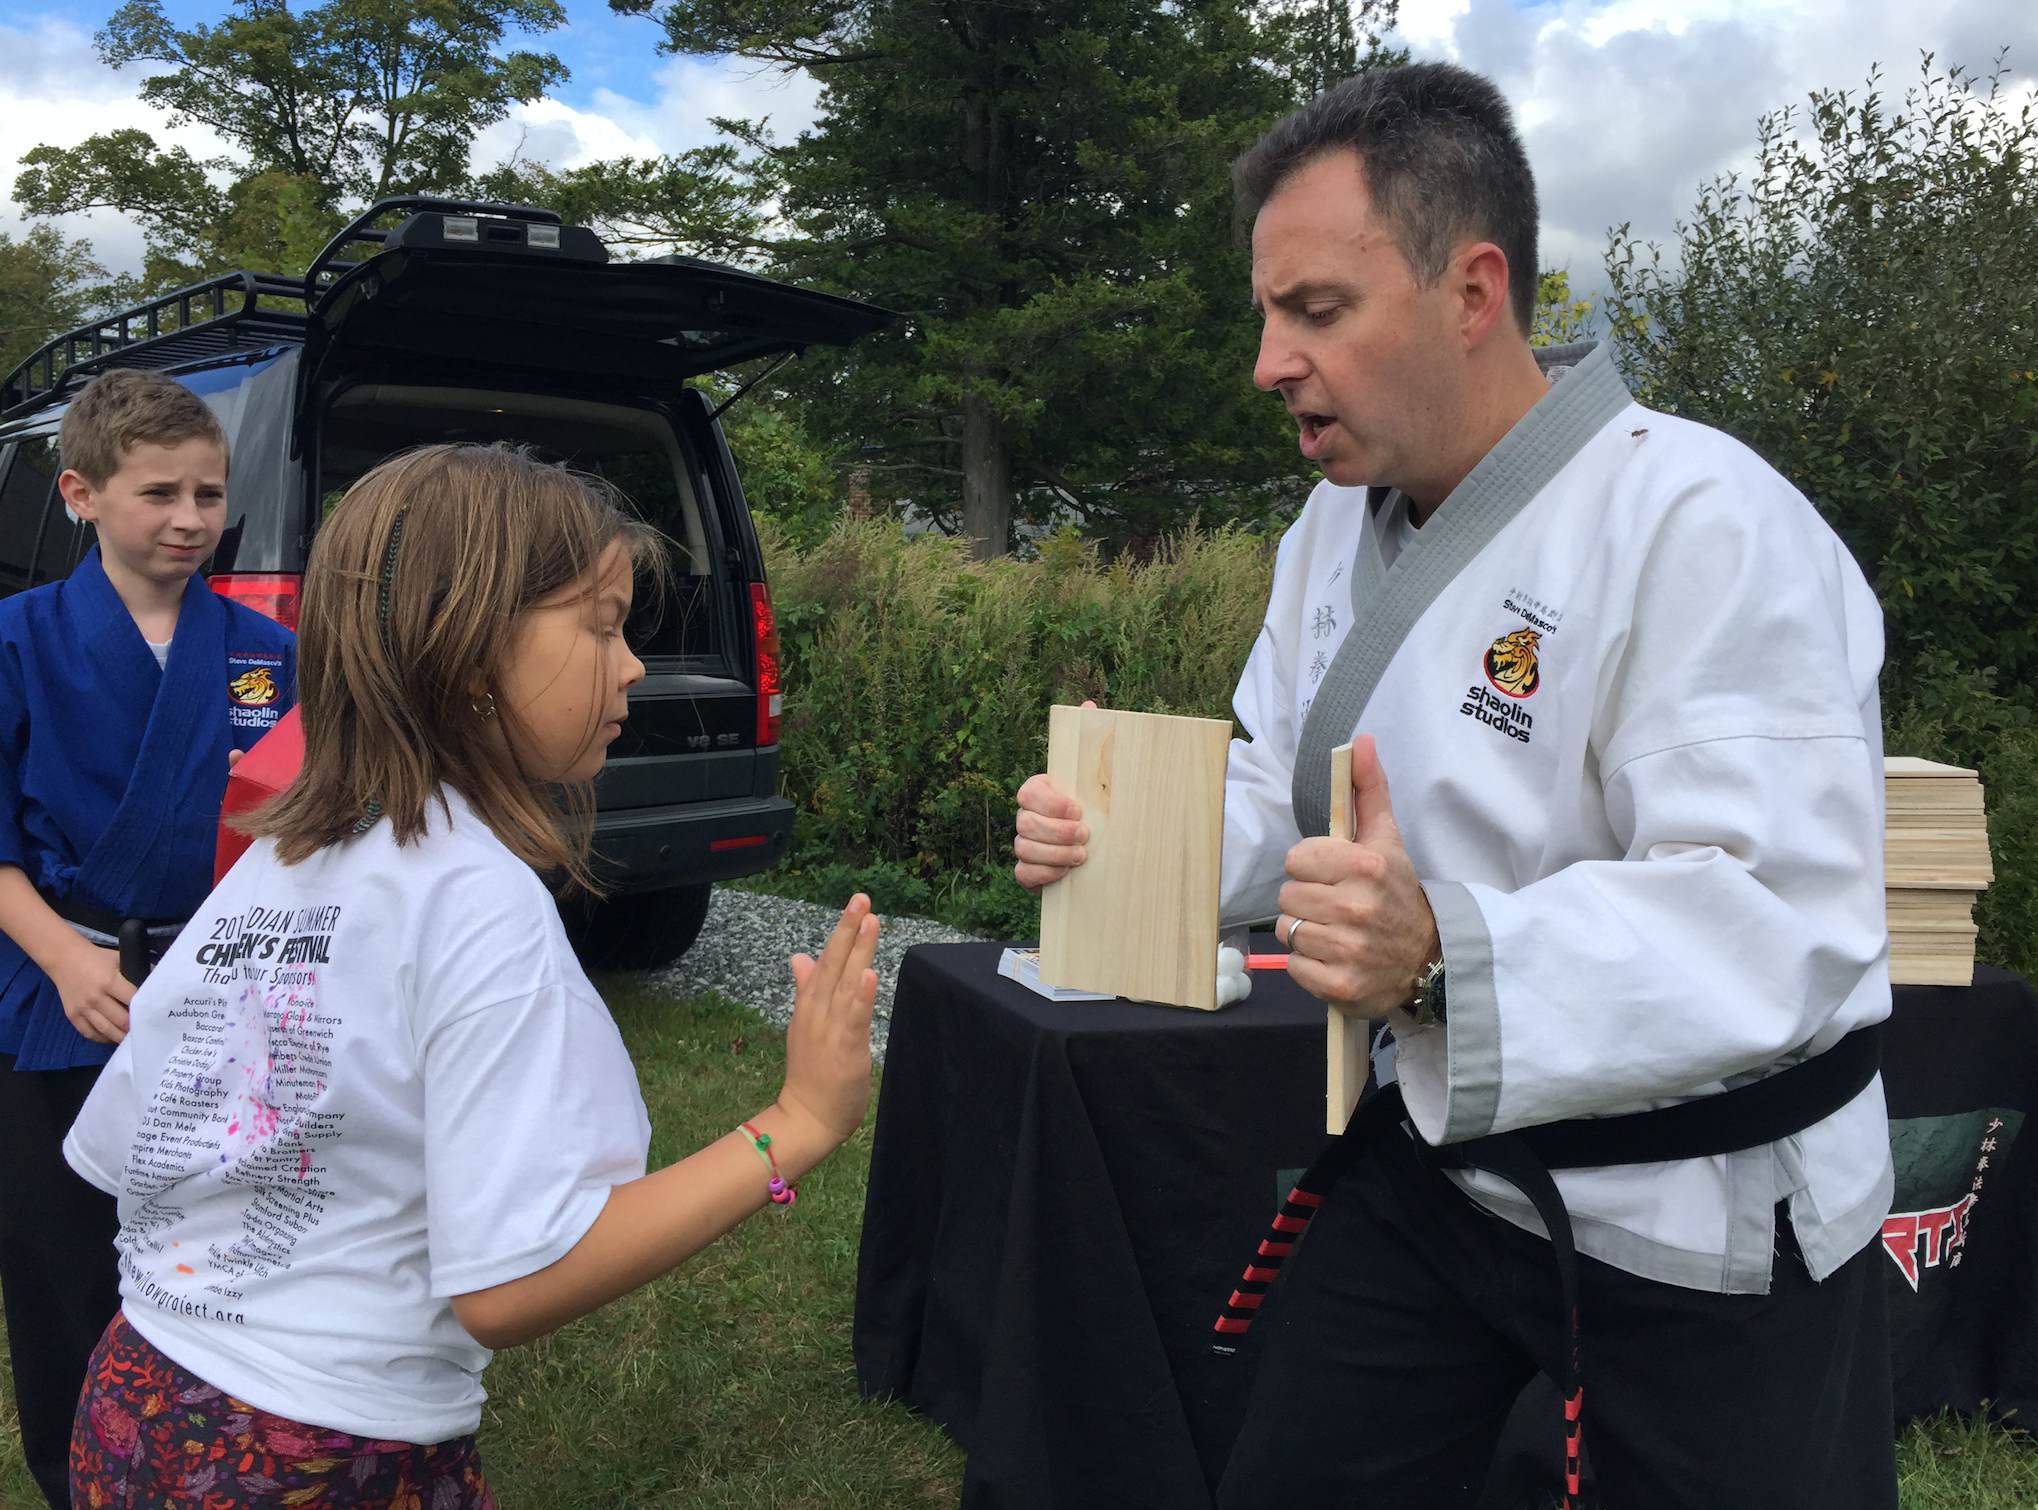 Lynn Gulli with Mike Meyer of SDSS Martial Arts at the Indian Summer Children’s Festival at Greenwich Audubon.